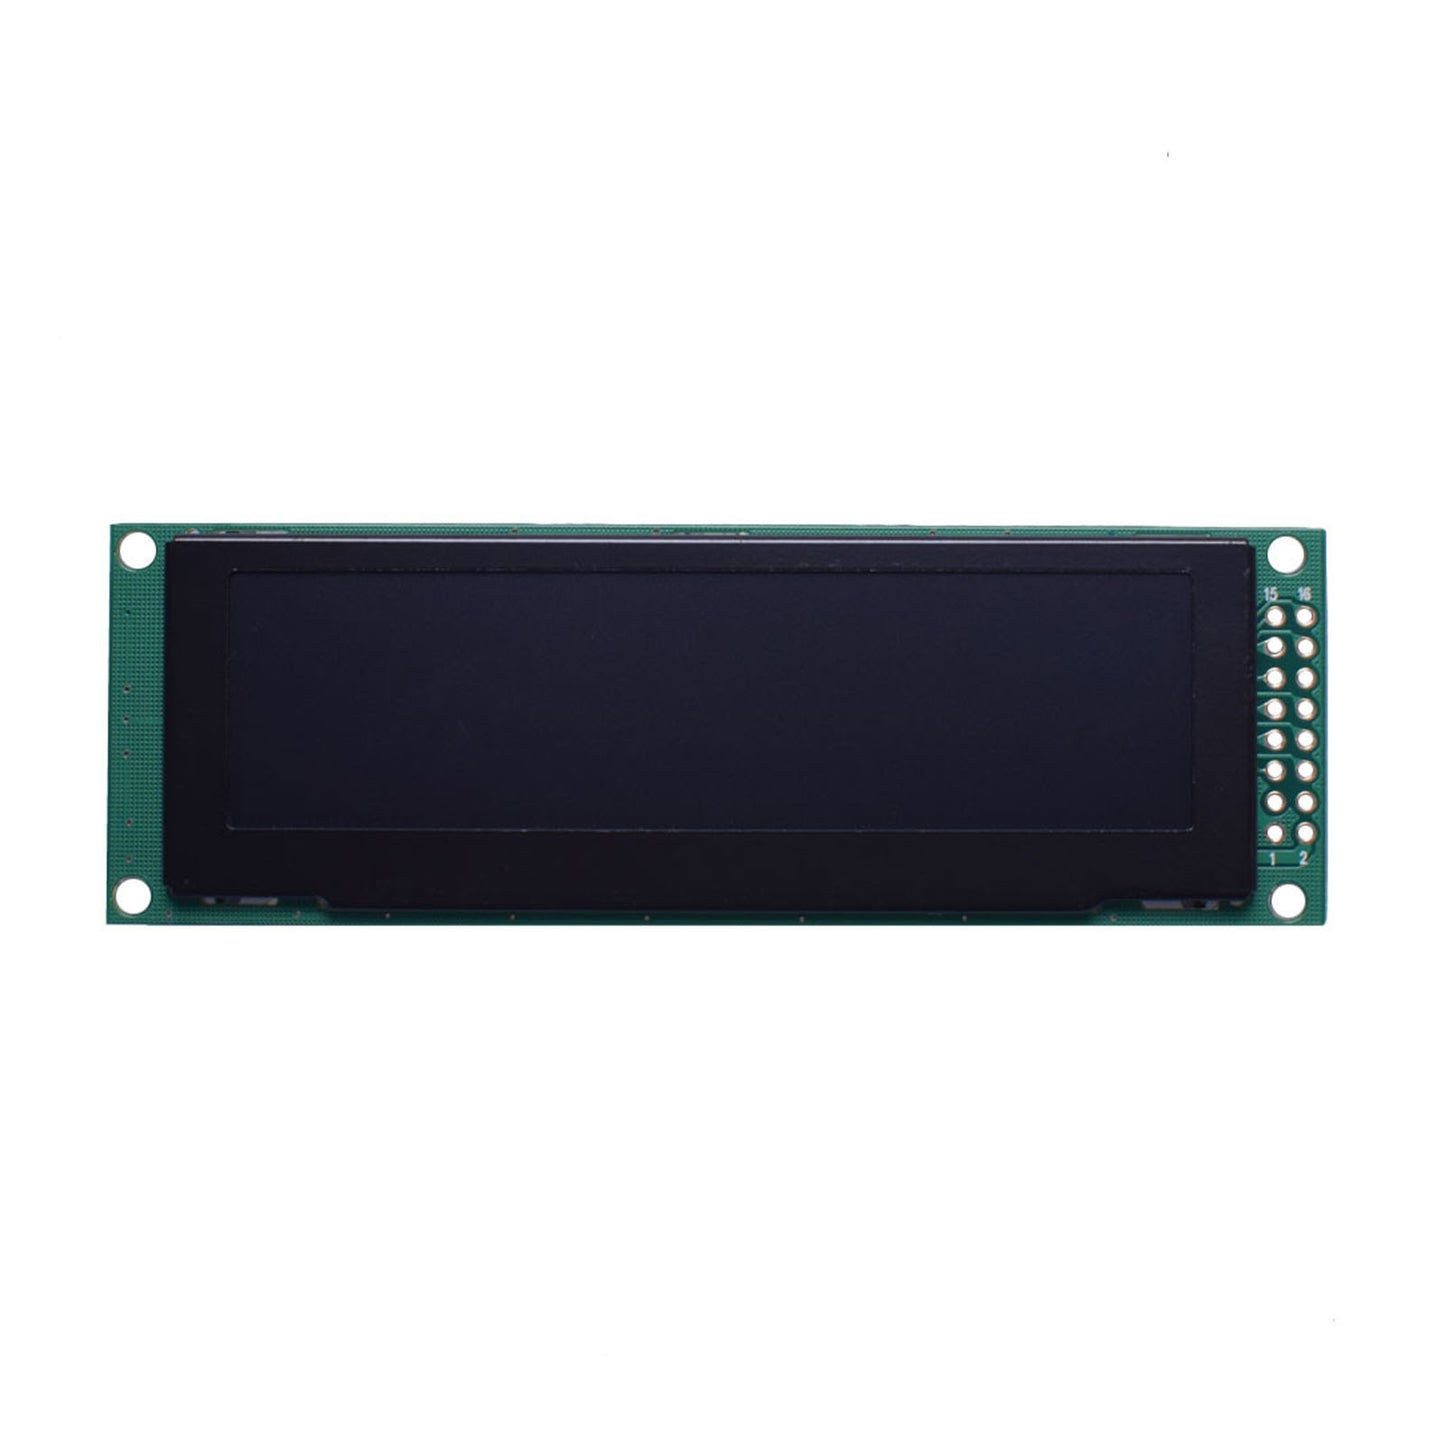 3.2-inch 256x64 monochrome OLED graphic display module with MCU and SPI interfaces